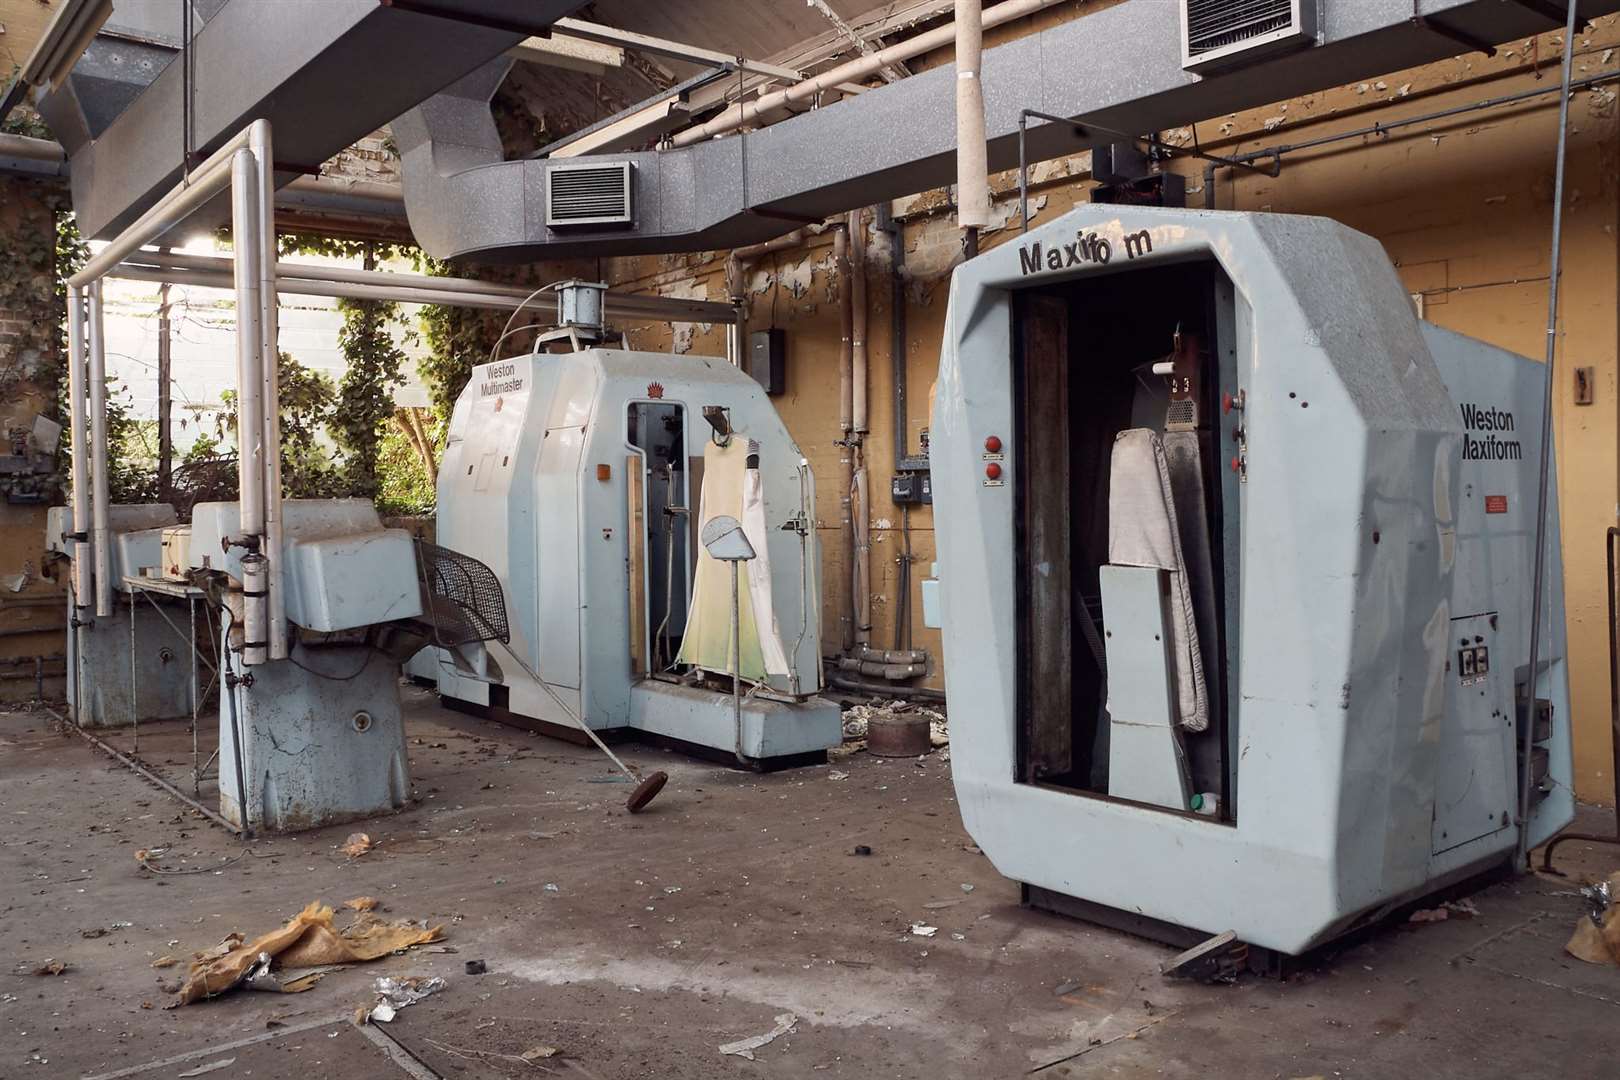 Disused machines at the derelict site in 2006. Images: Jamie McGregor Smith